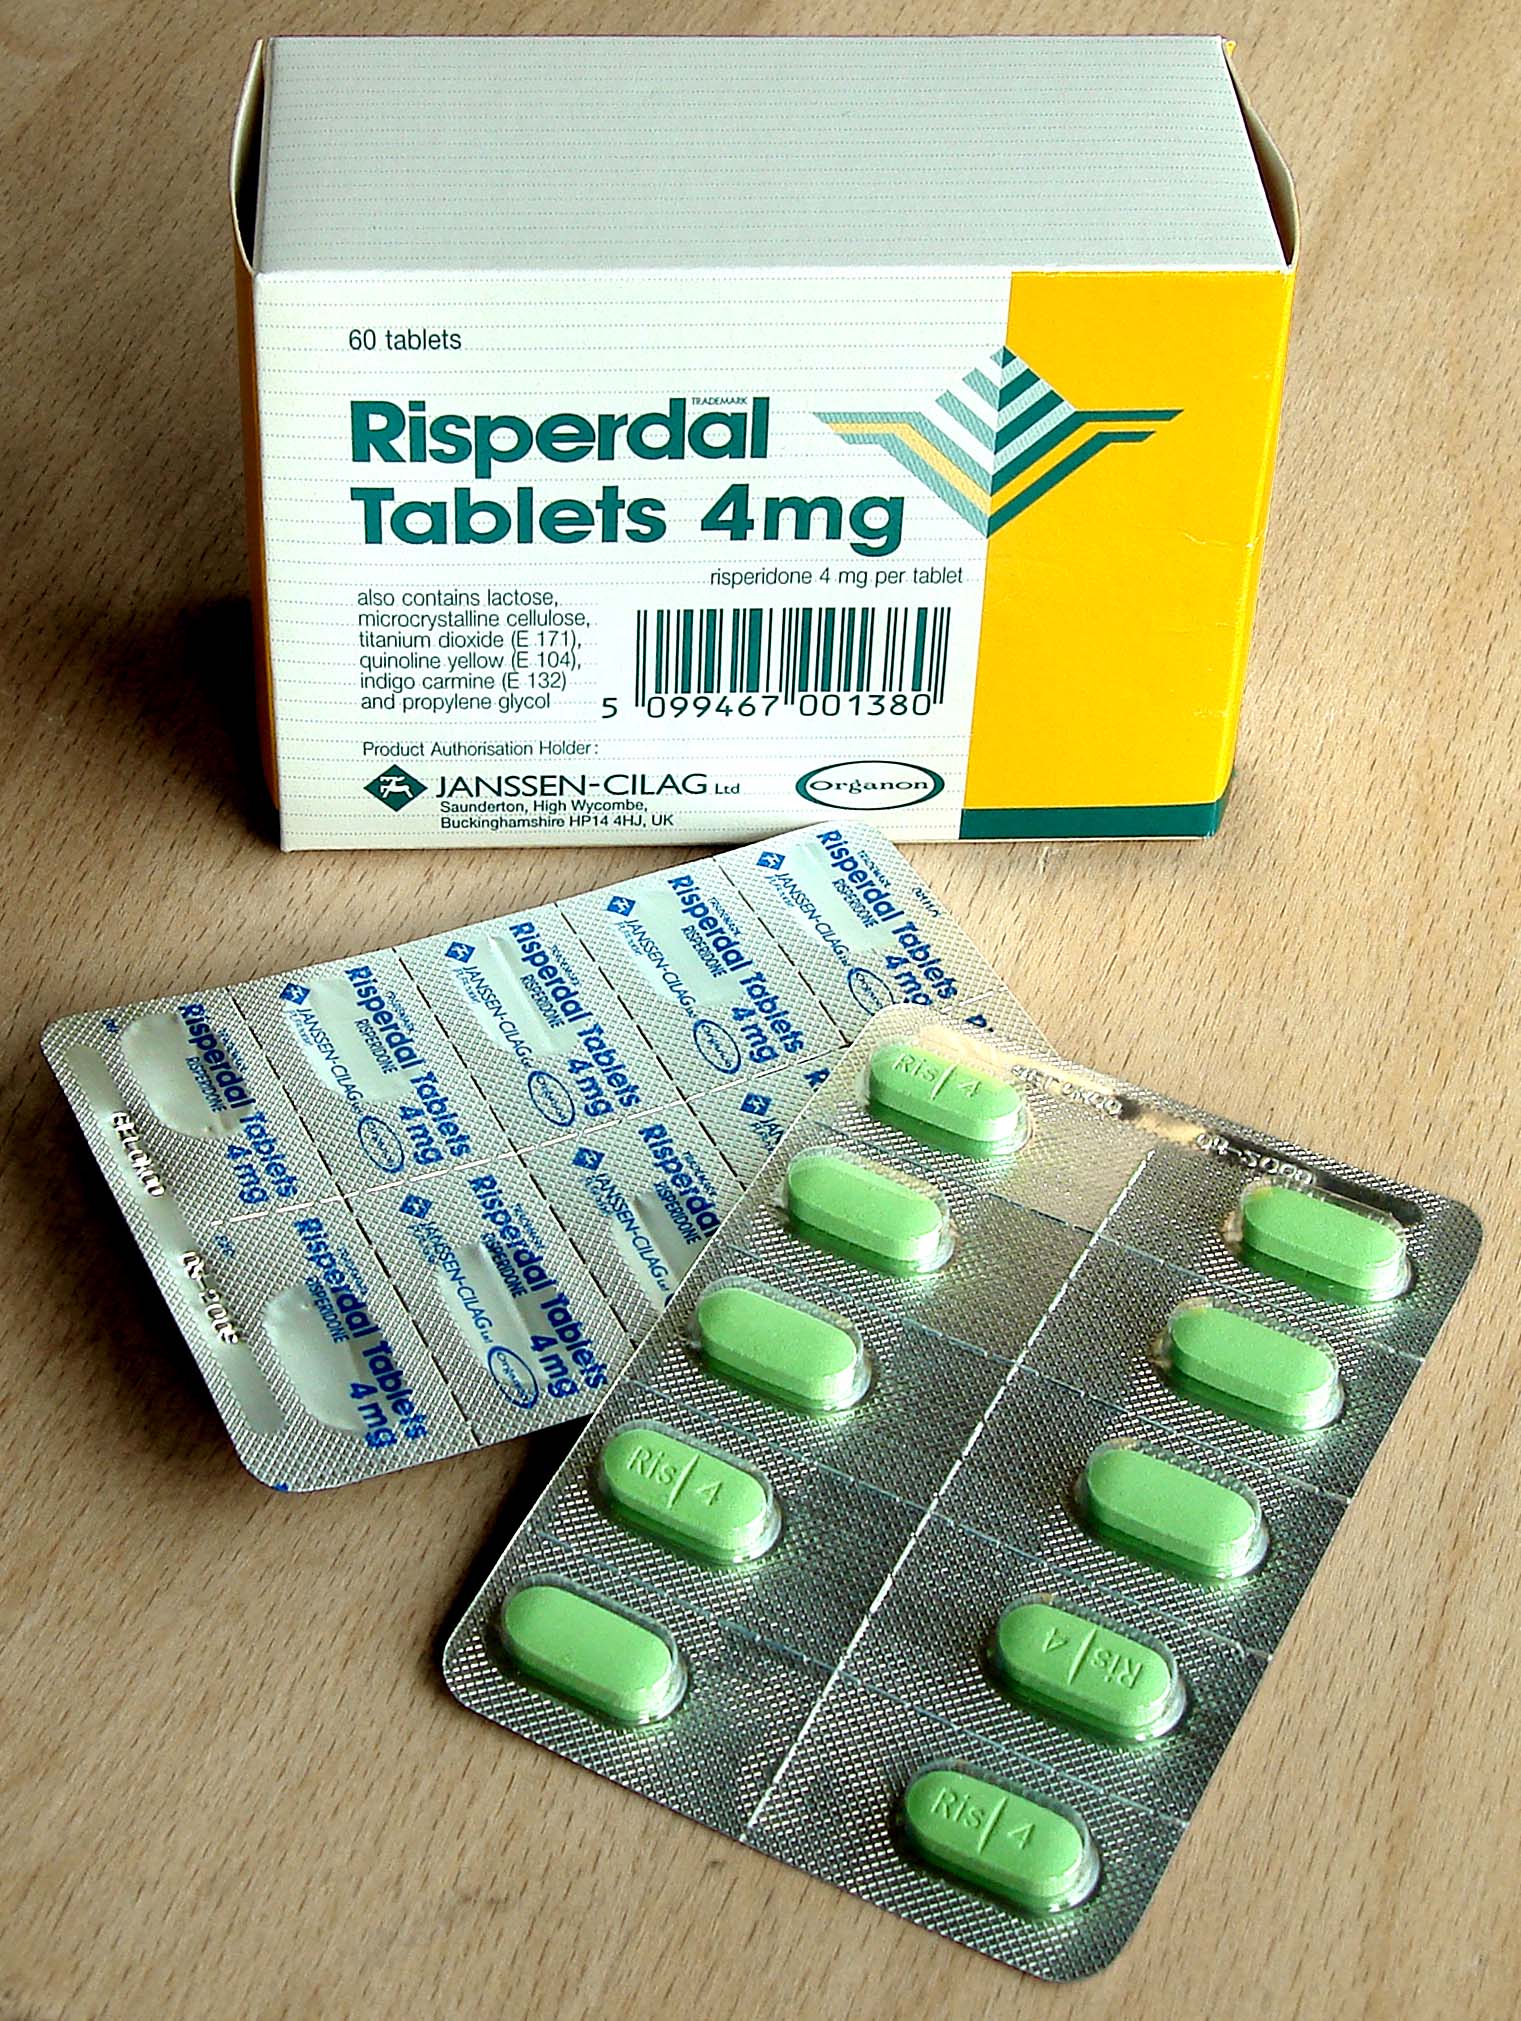 risperdal used for anxiety